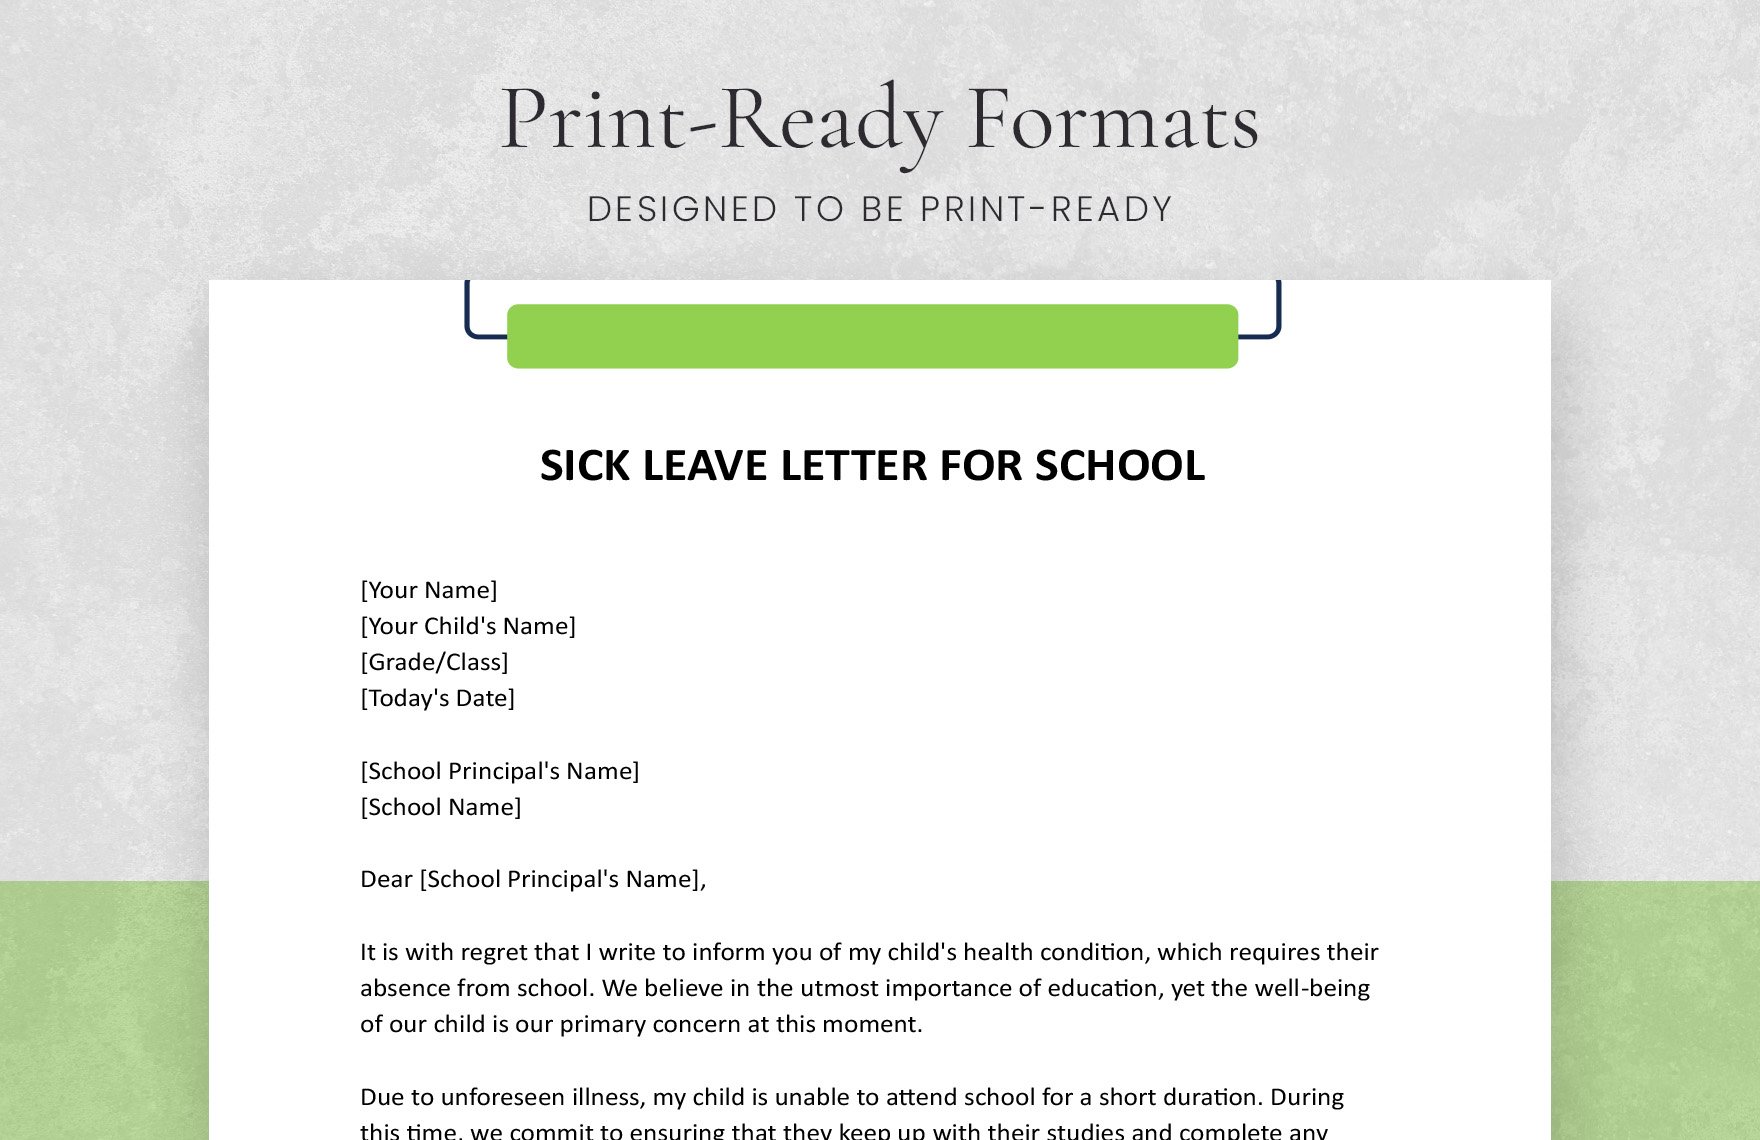 Sick Leave Letter For School